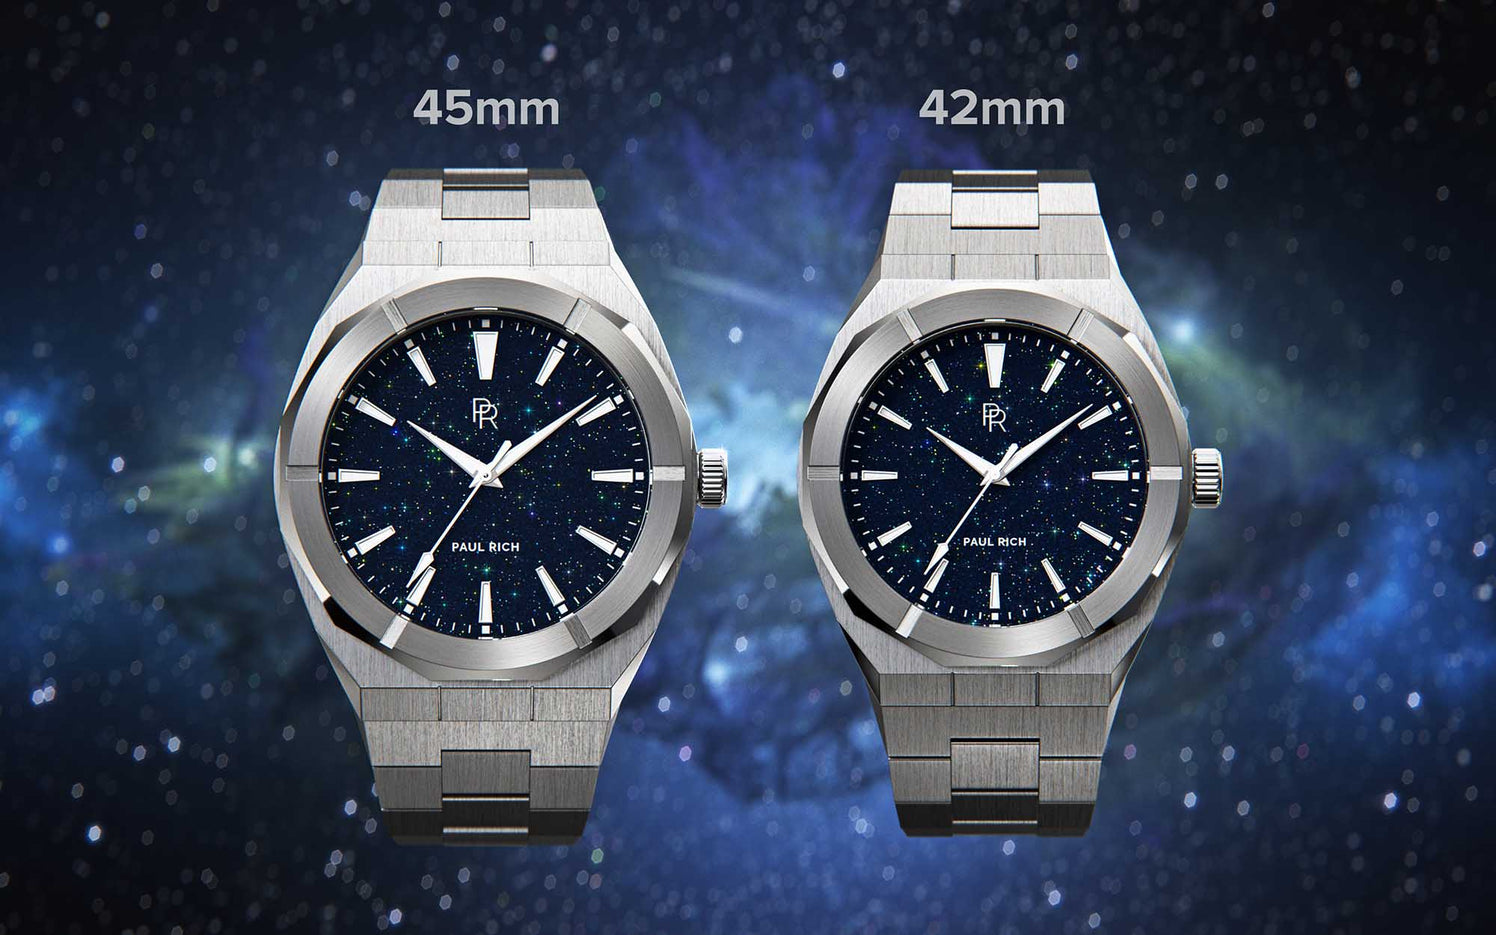 Introducing new sizes - Star Dust in 42mm